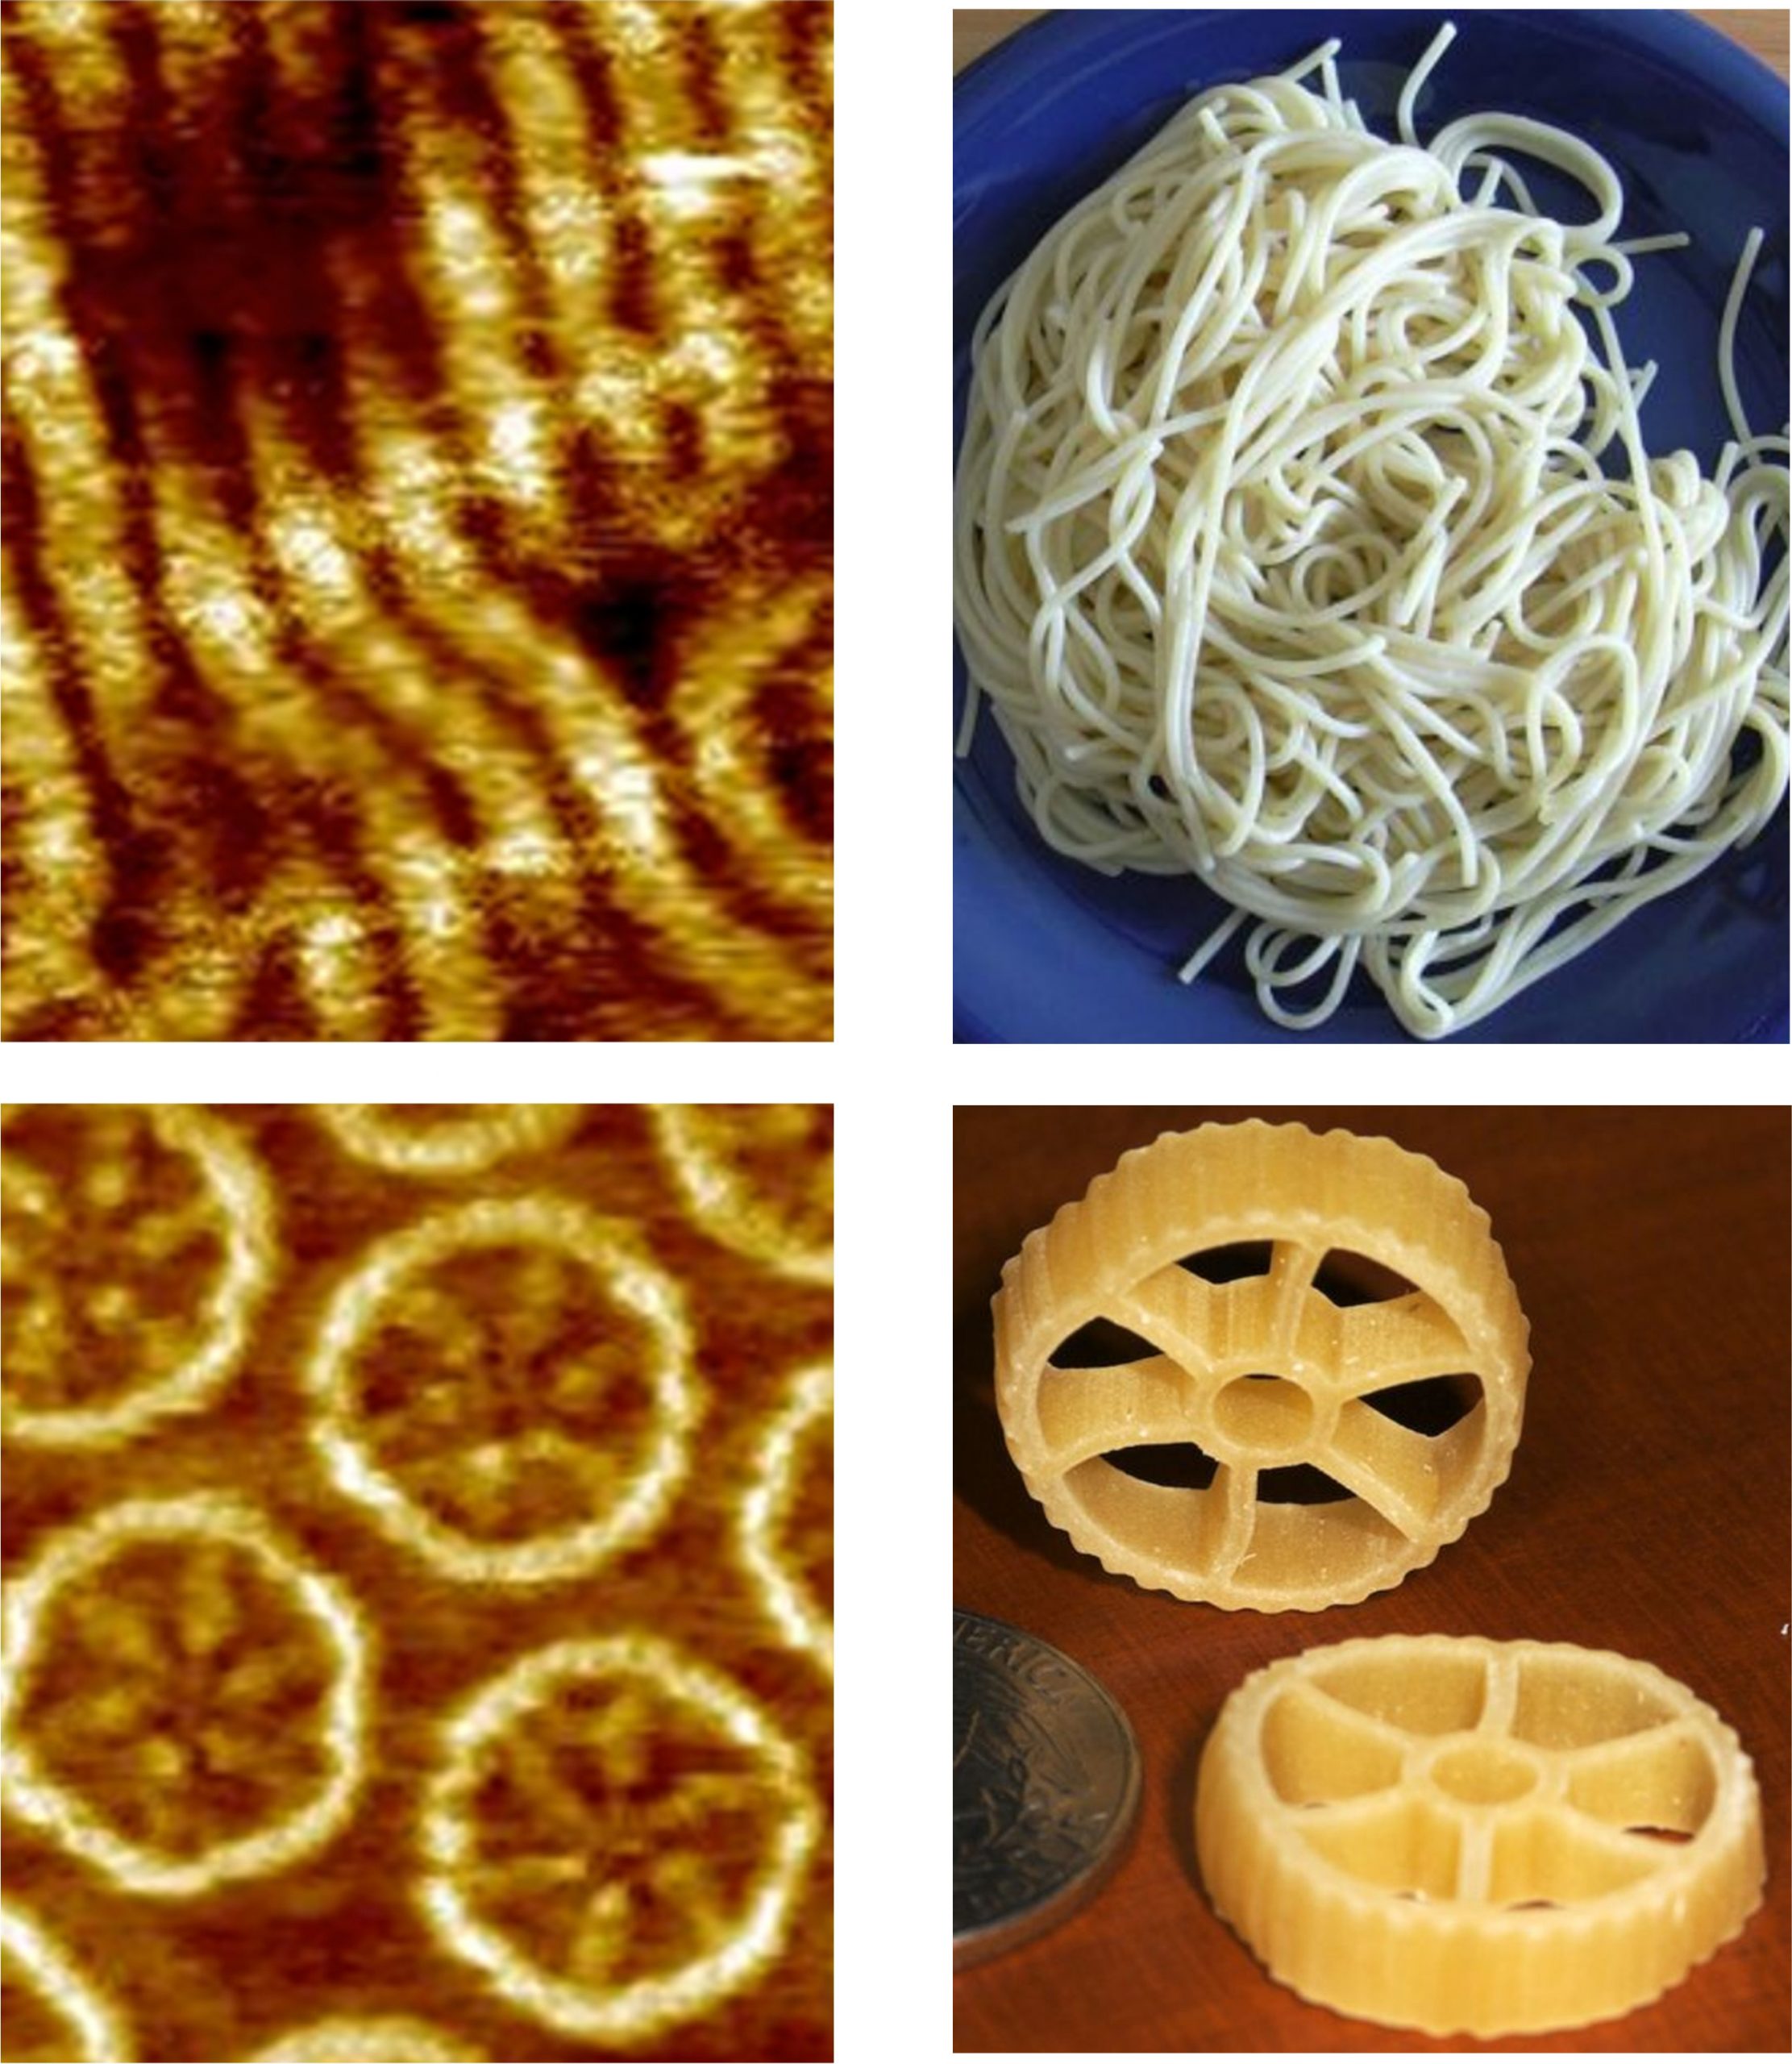 Images of molecules for light-emitting diodes on the left are compared with similar shaped pasta on the right. The upper left electron microscope image shows spaghetti-shaped organic polymers now used for organic light-emitting diodes, or OLEDs. The lower left image shows new molecules – created by scientists at the University of Utah and two German universities – that are shaped like wagon-wheel or rotelle pasta and emit light more efficiently than the spaghetti-shape polymers.